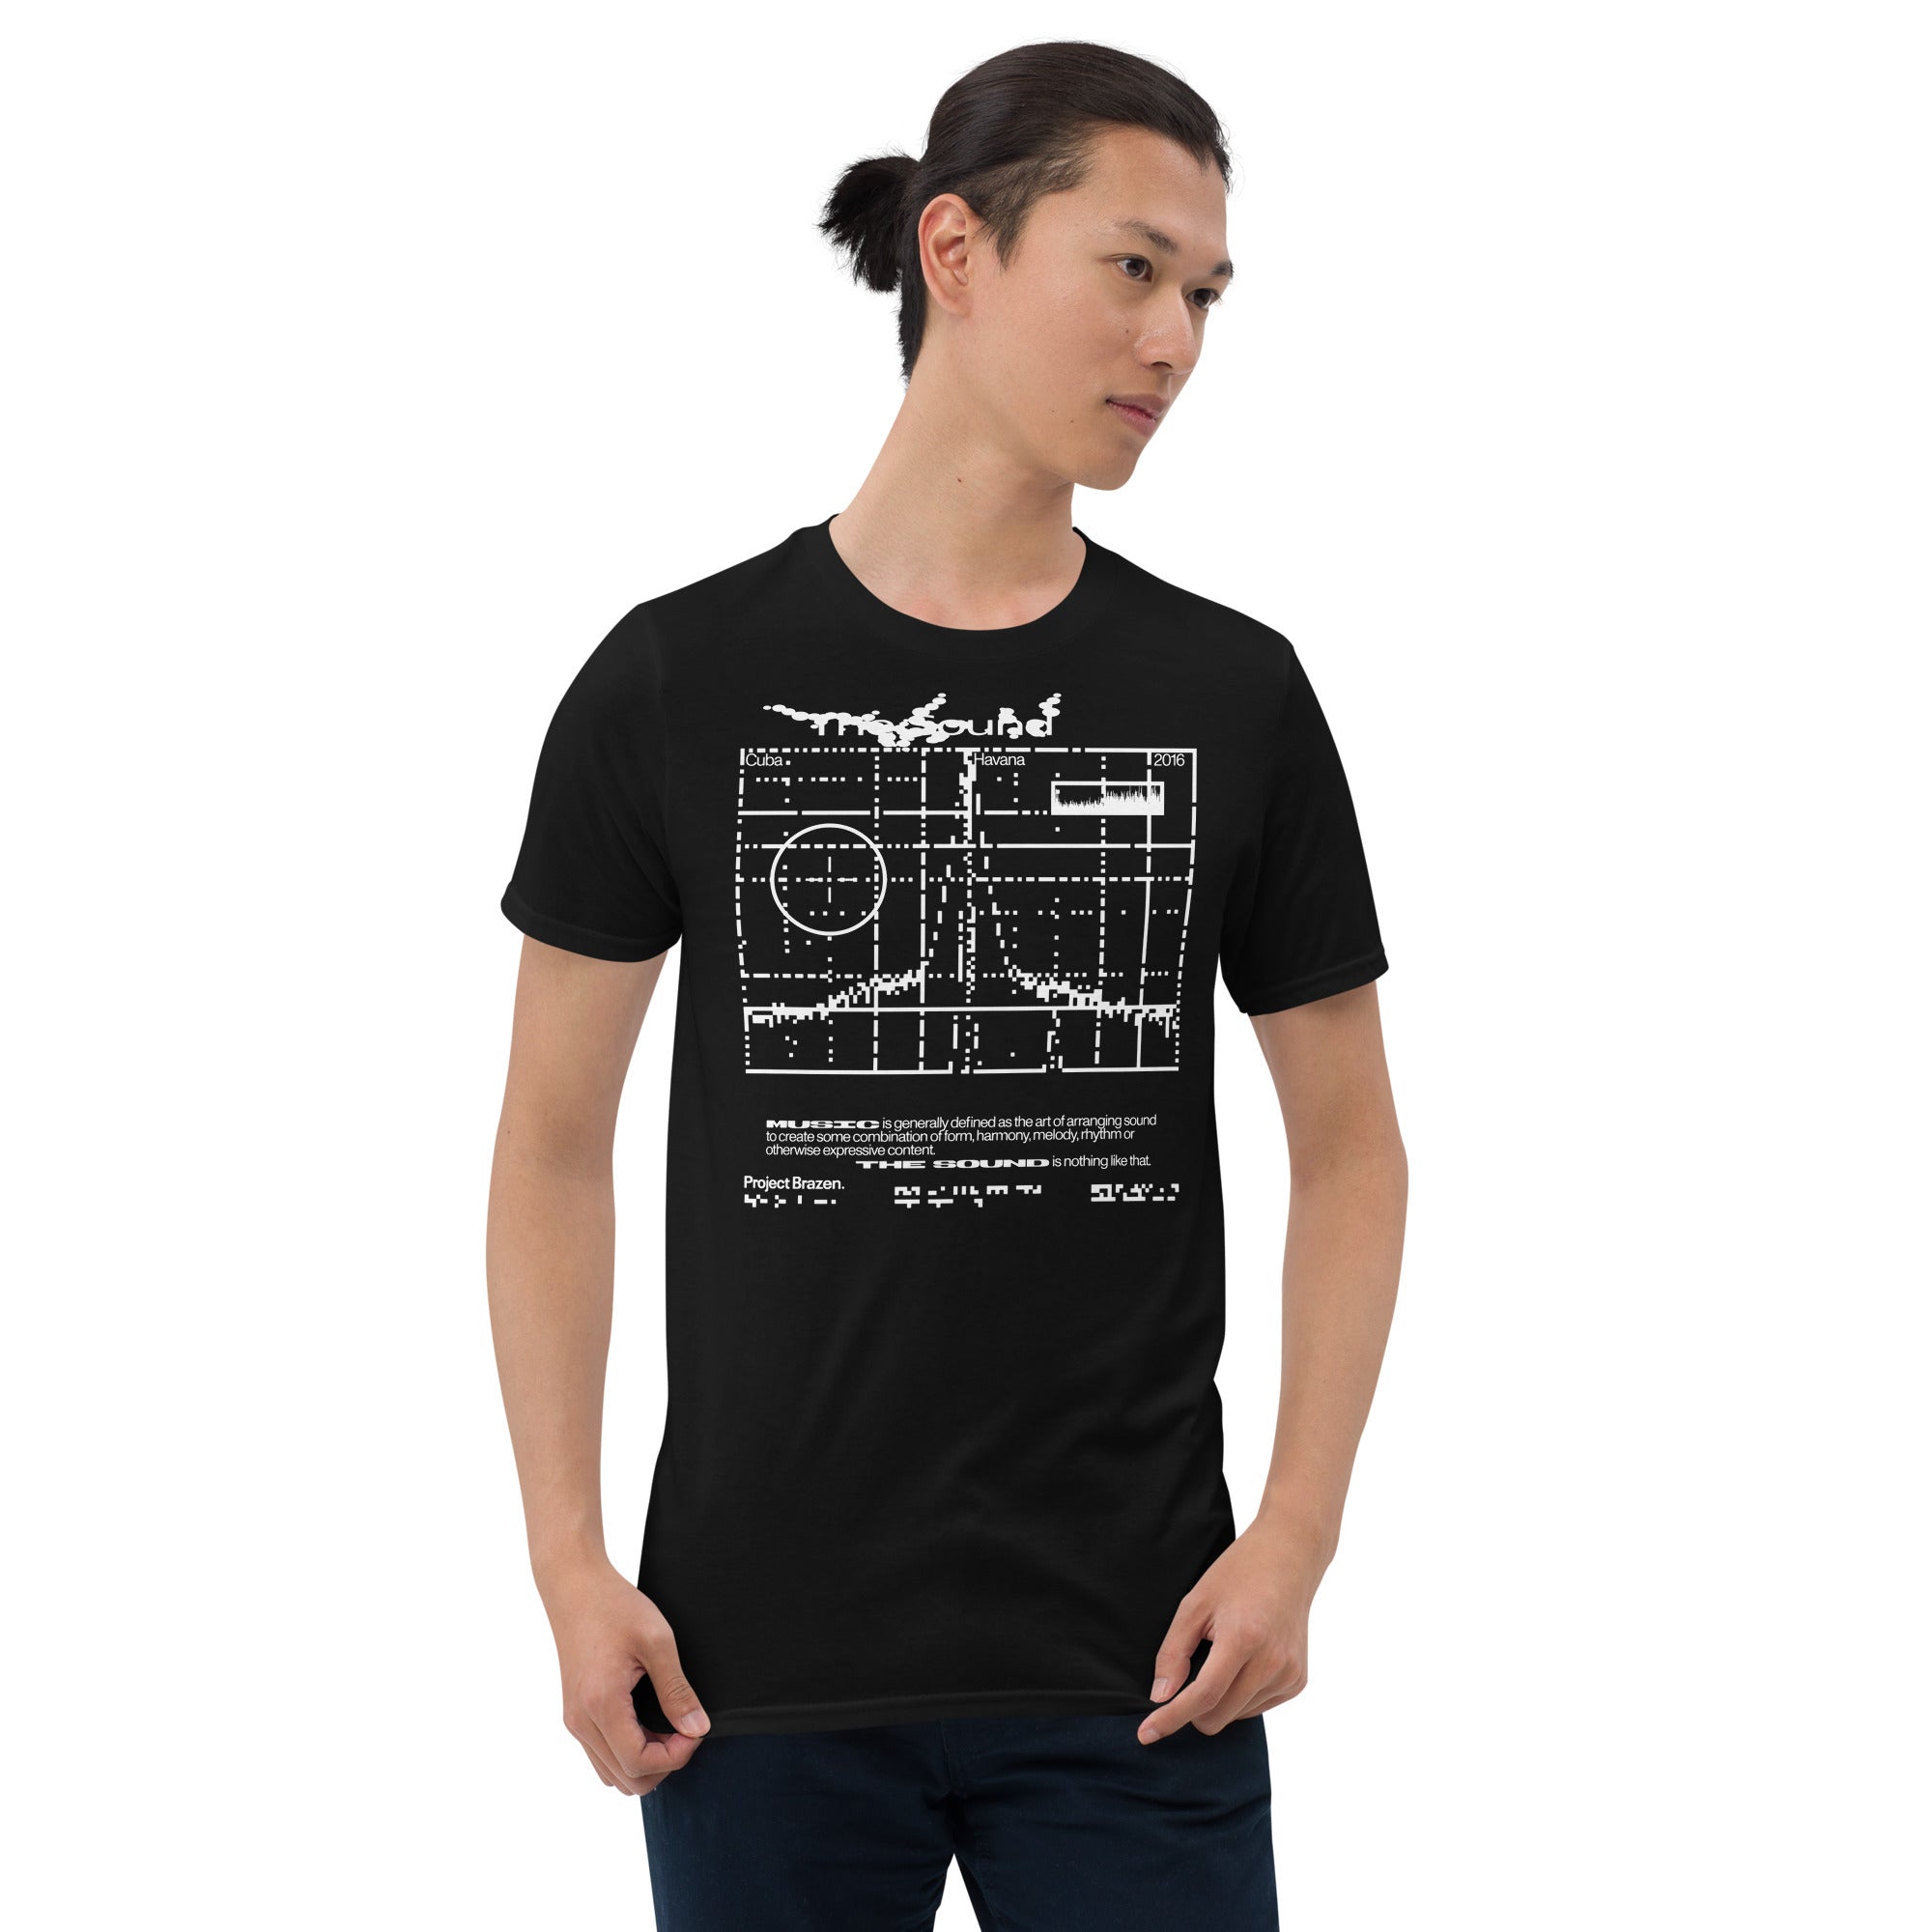 The Sound of Music Tee